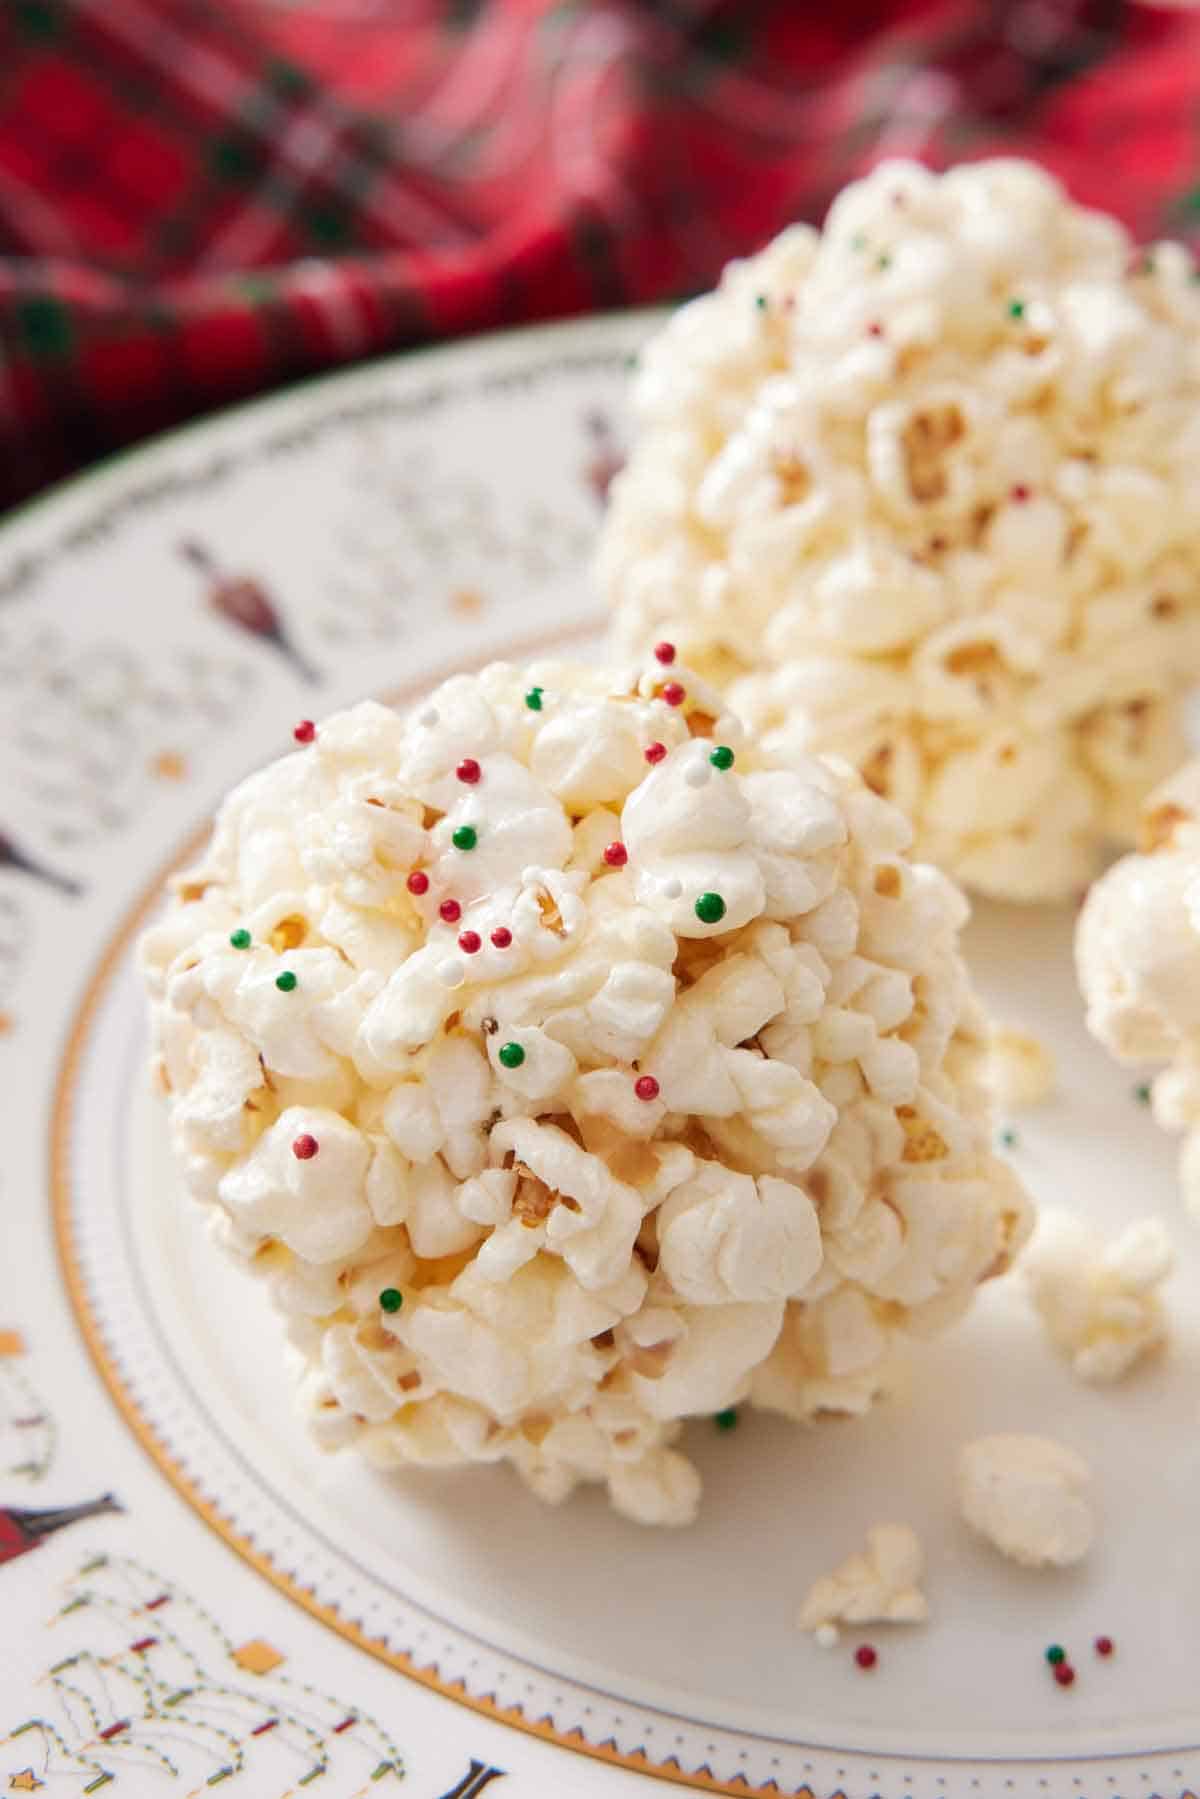 A popcorn ball in a plate with green and red sprinkles.